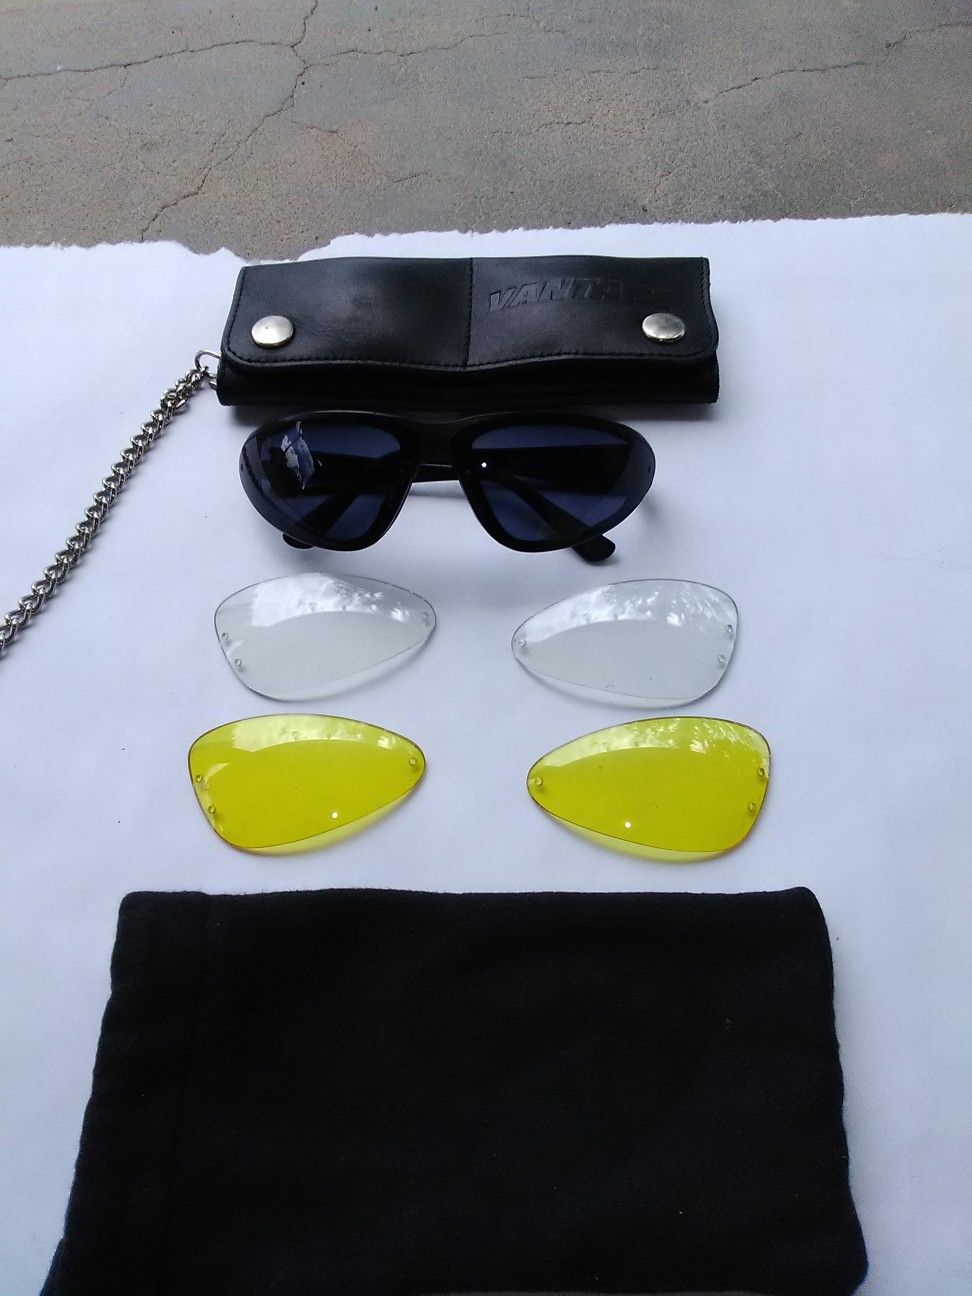 Motorcycle glasses